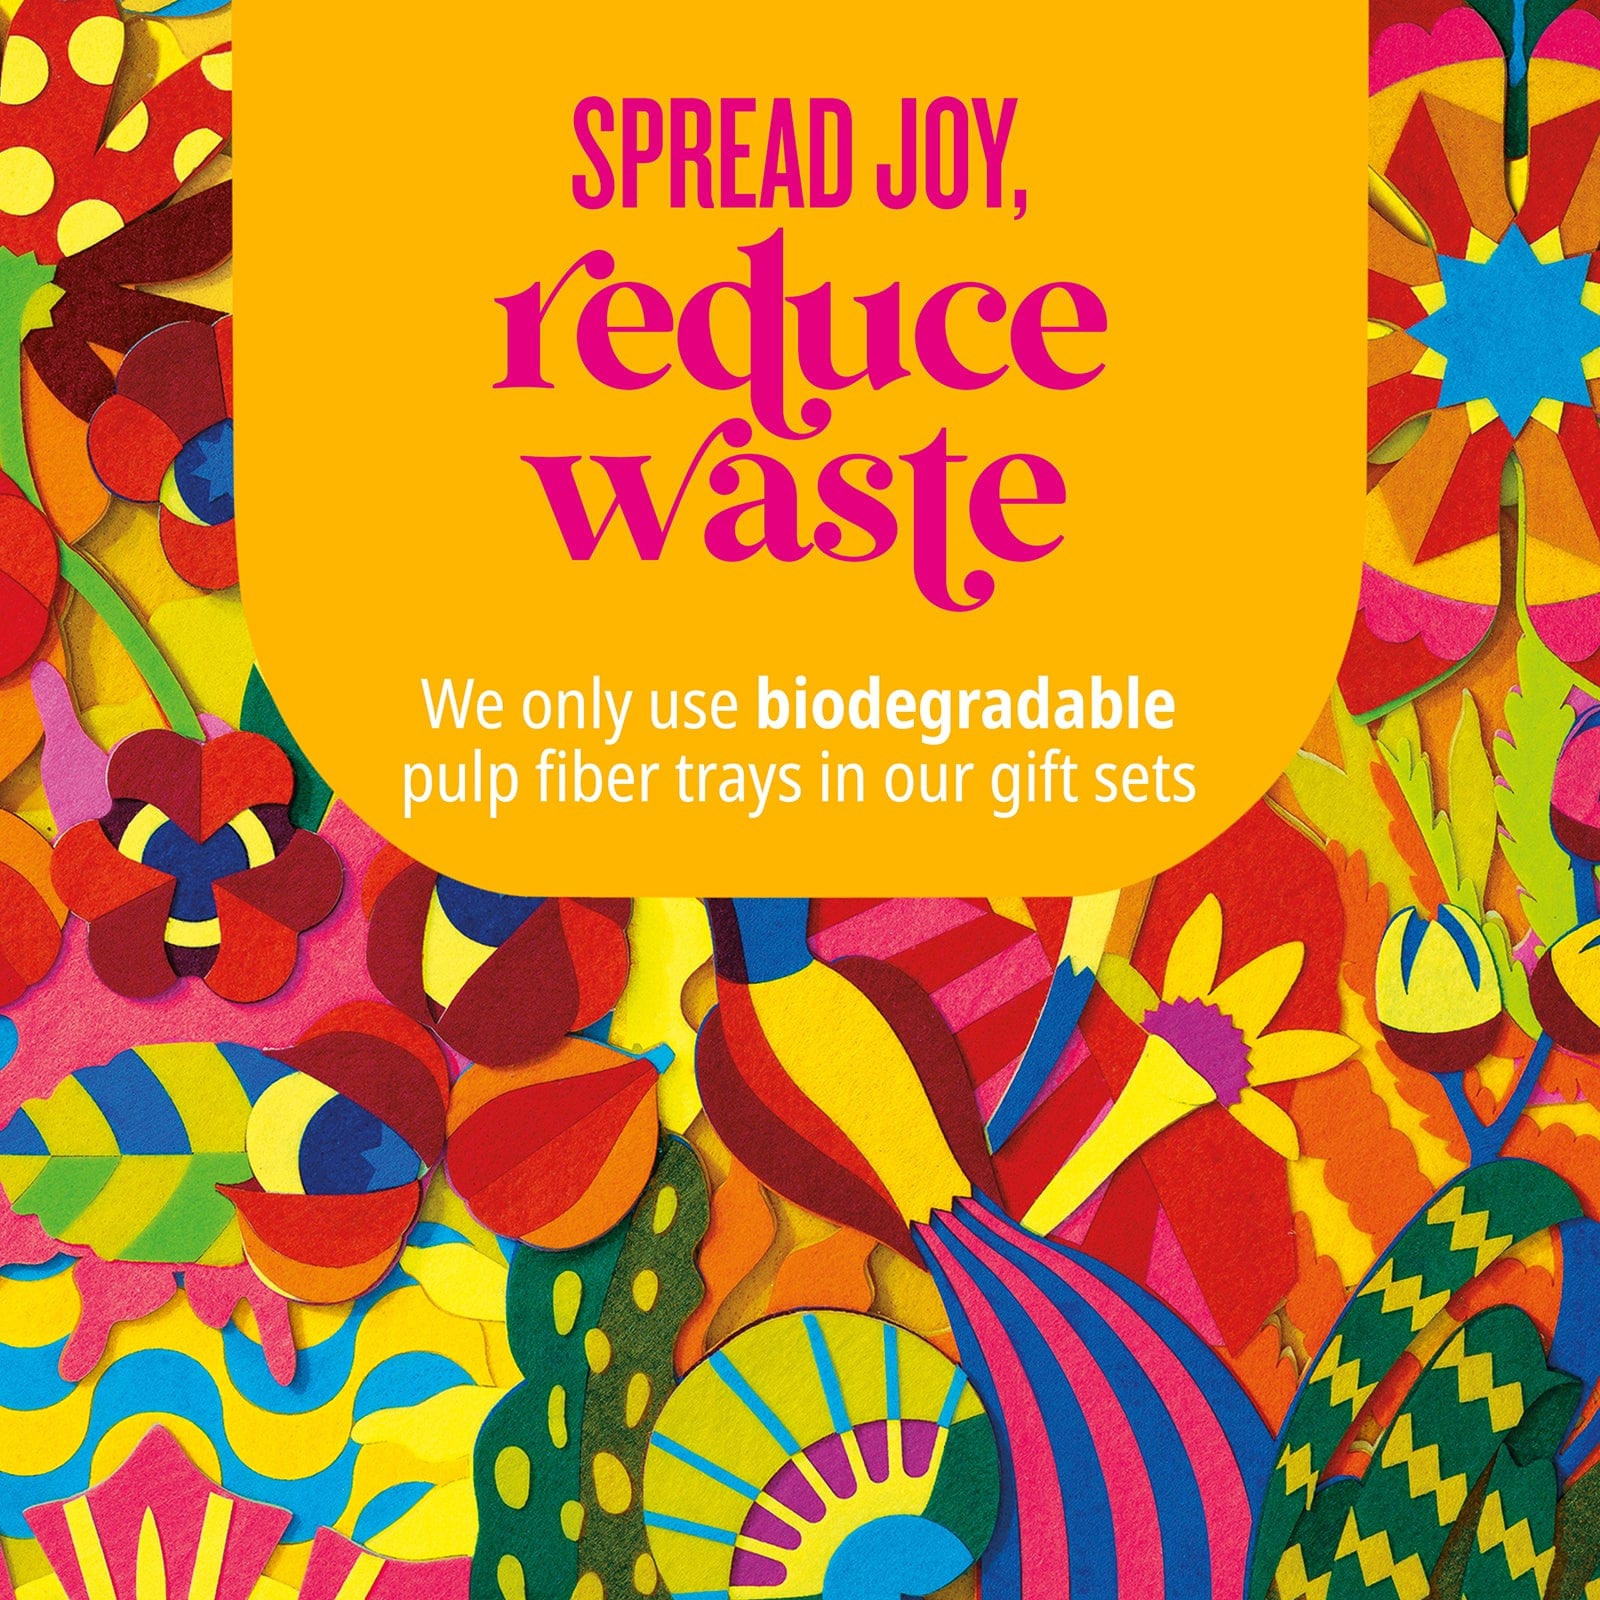 Spread joy. reduce waste we only use biodegradable pulp fiber trays in our gift sets